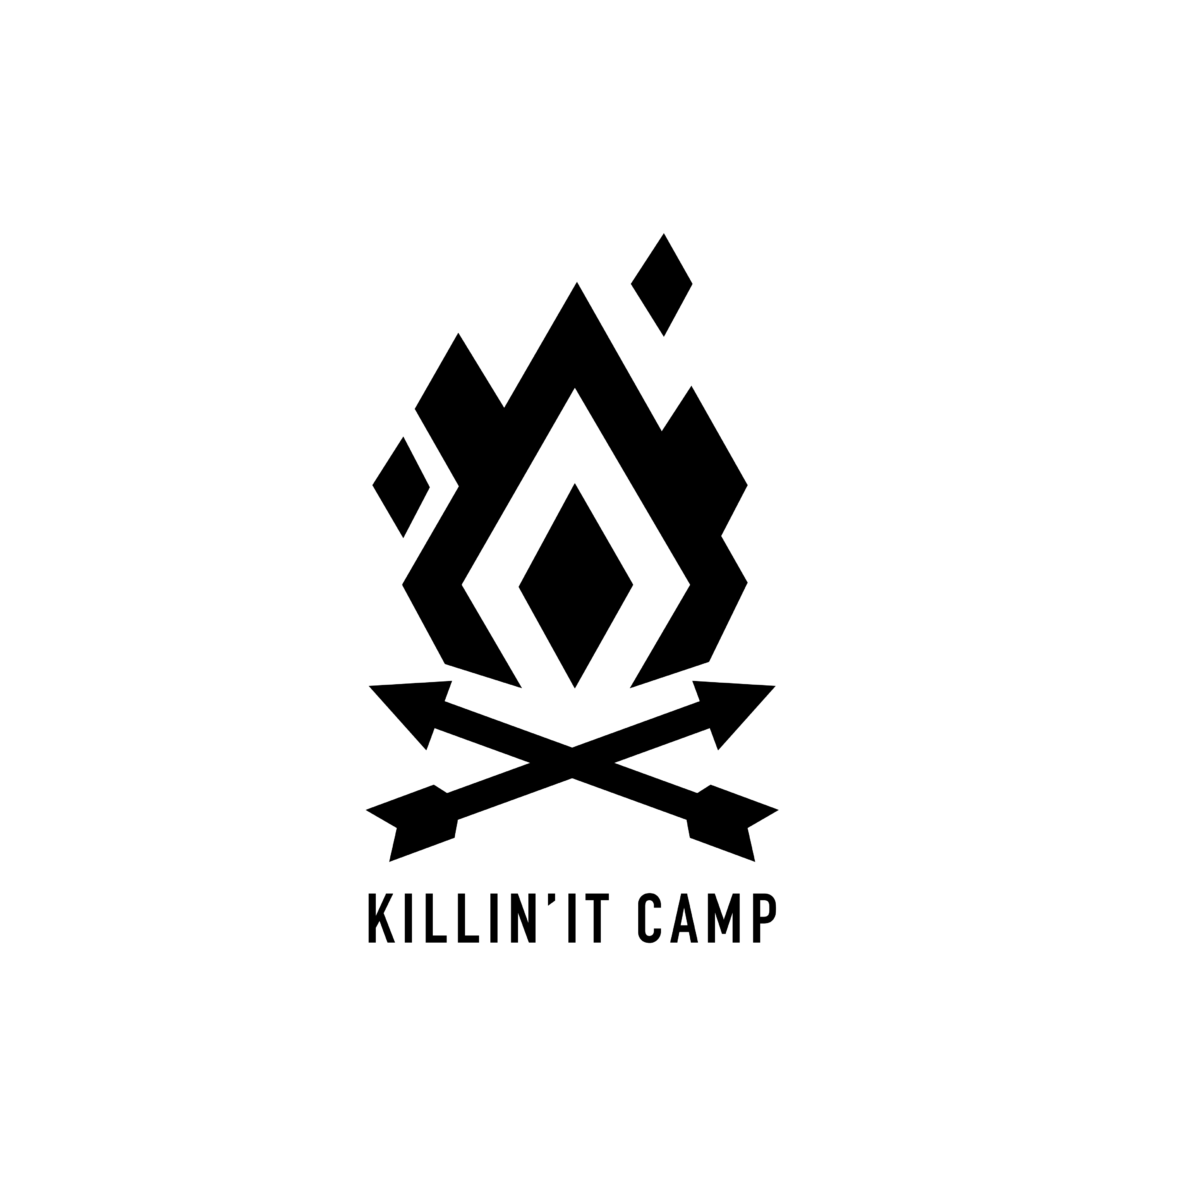 A photo of the podcast spondot, Killin' It Camp, is captured. They sponsor the Practice of the Practice, a therapist podcast.